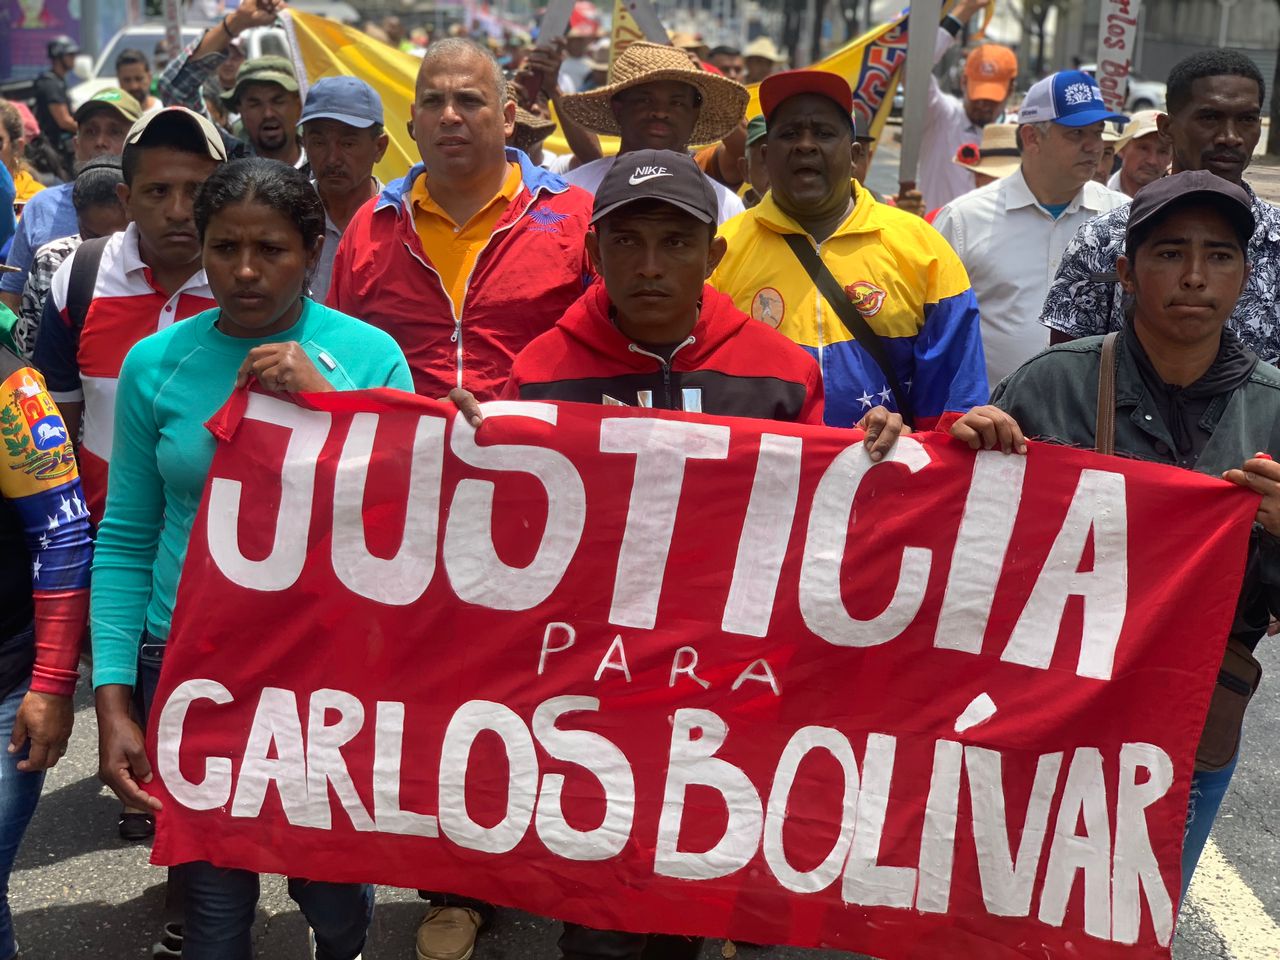 Venezuelan peasant activists marching in Caracas to demand justice for the assassination of Carlos Bolívar in Guárico state. Photo: Diario VEA.